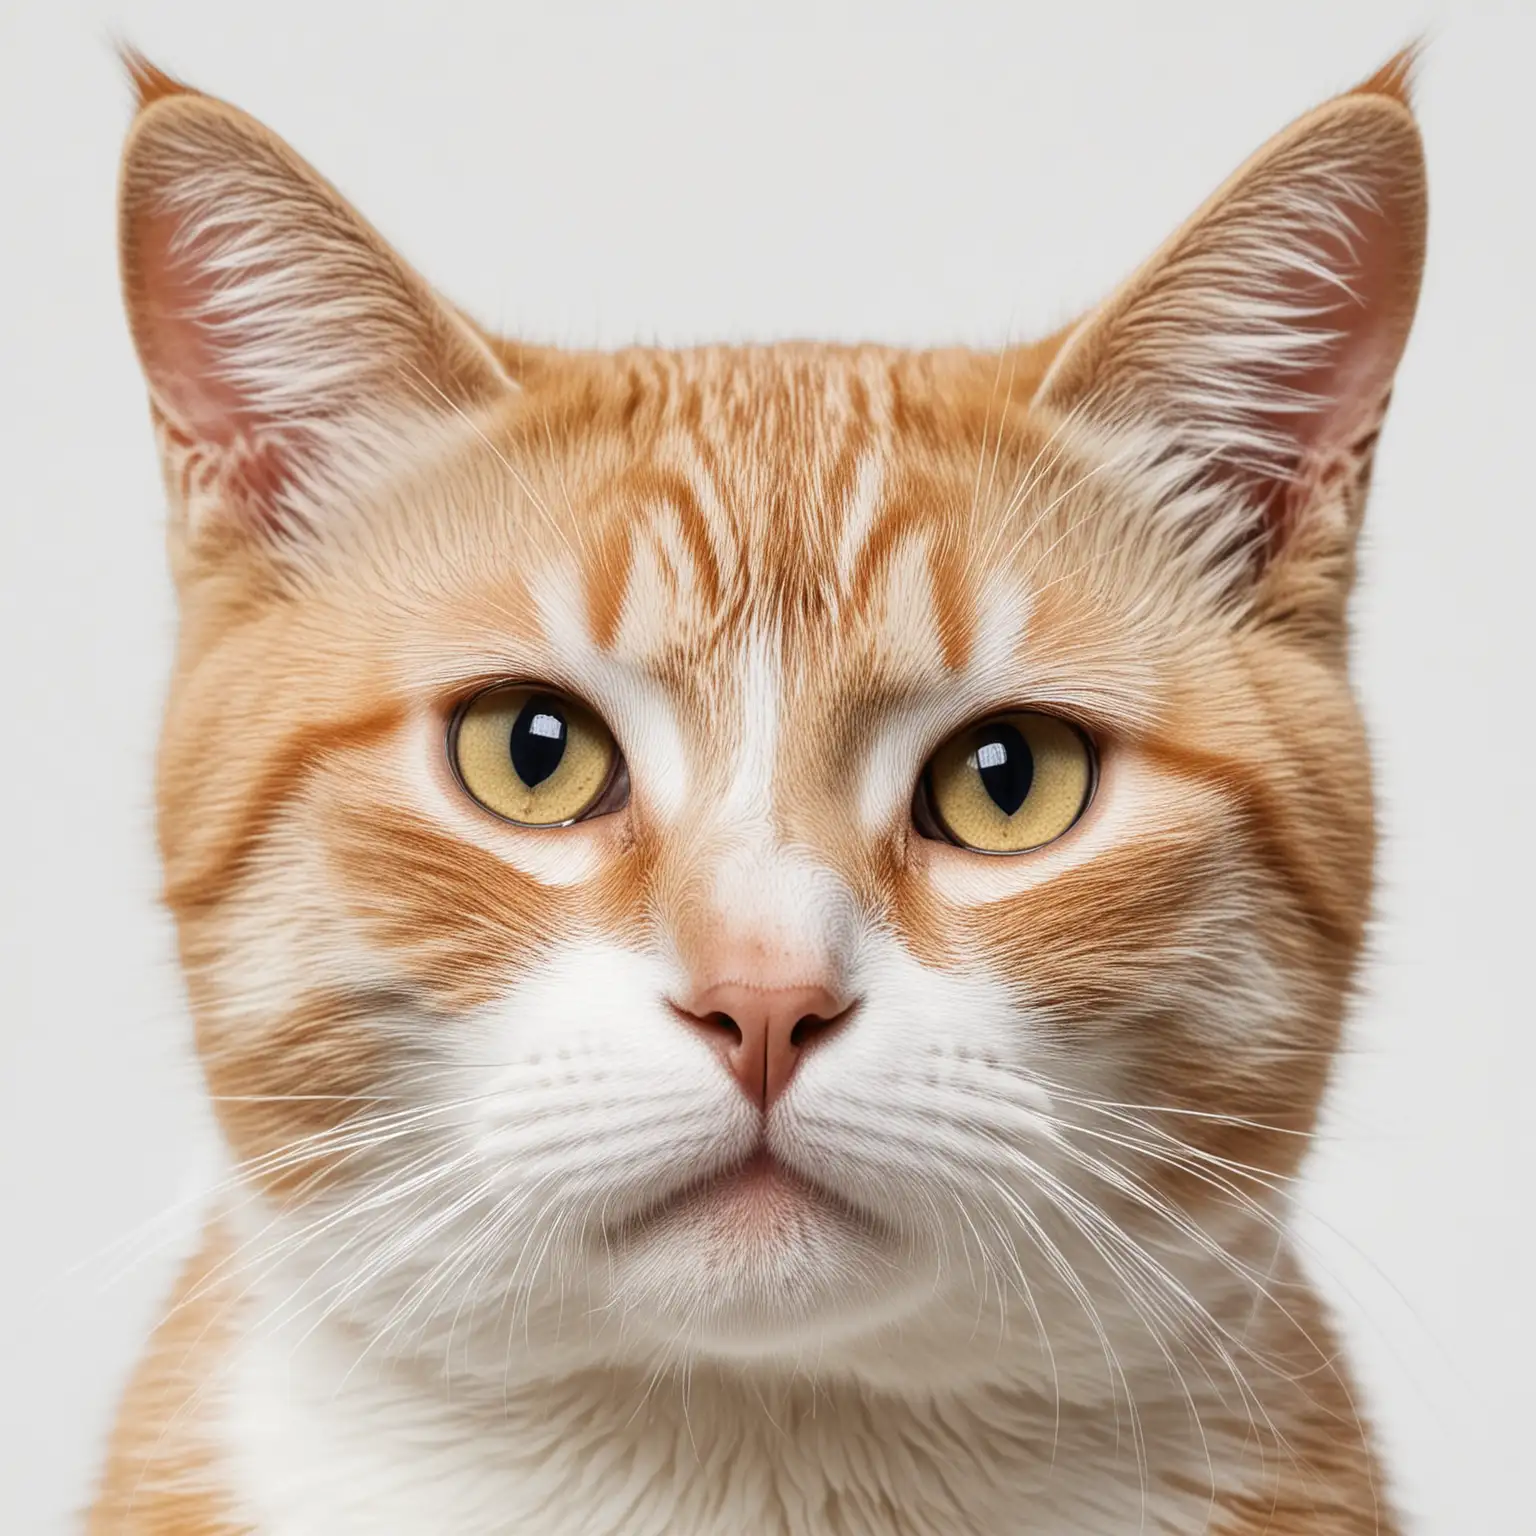 Portrait of a Cat on White Background